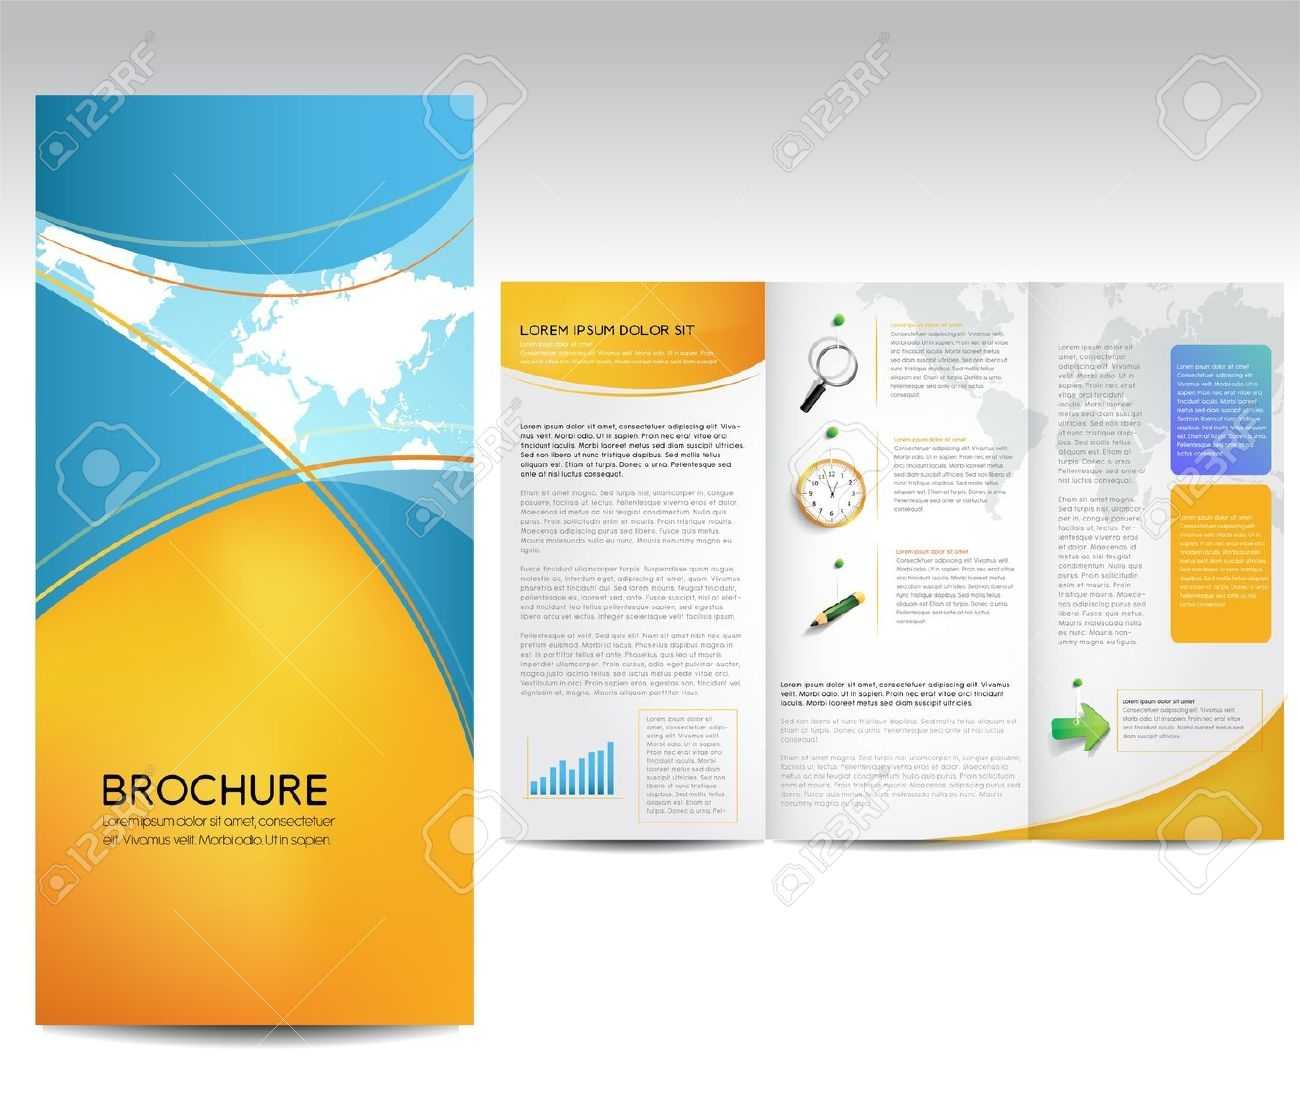 Free Brochure Templates For Word 2010 – Atlantaauctionco Intended For Free Brochure Templates For Word 2010